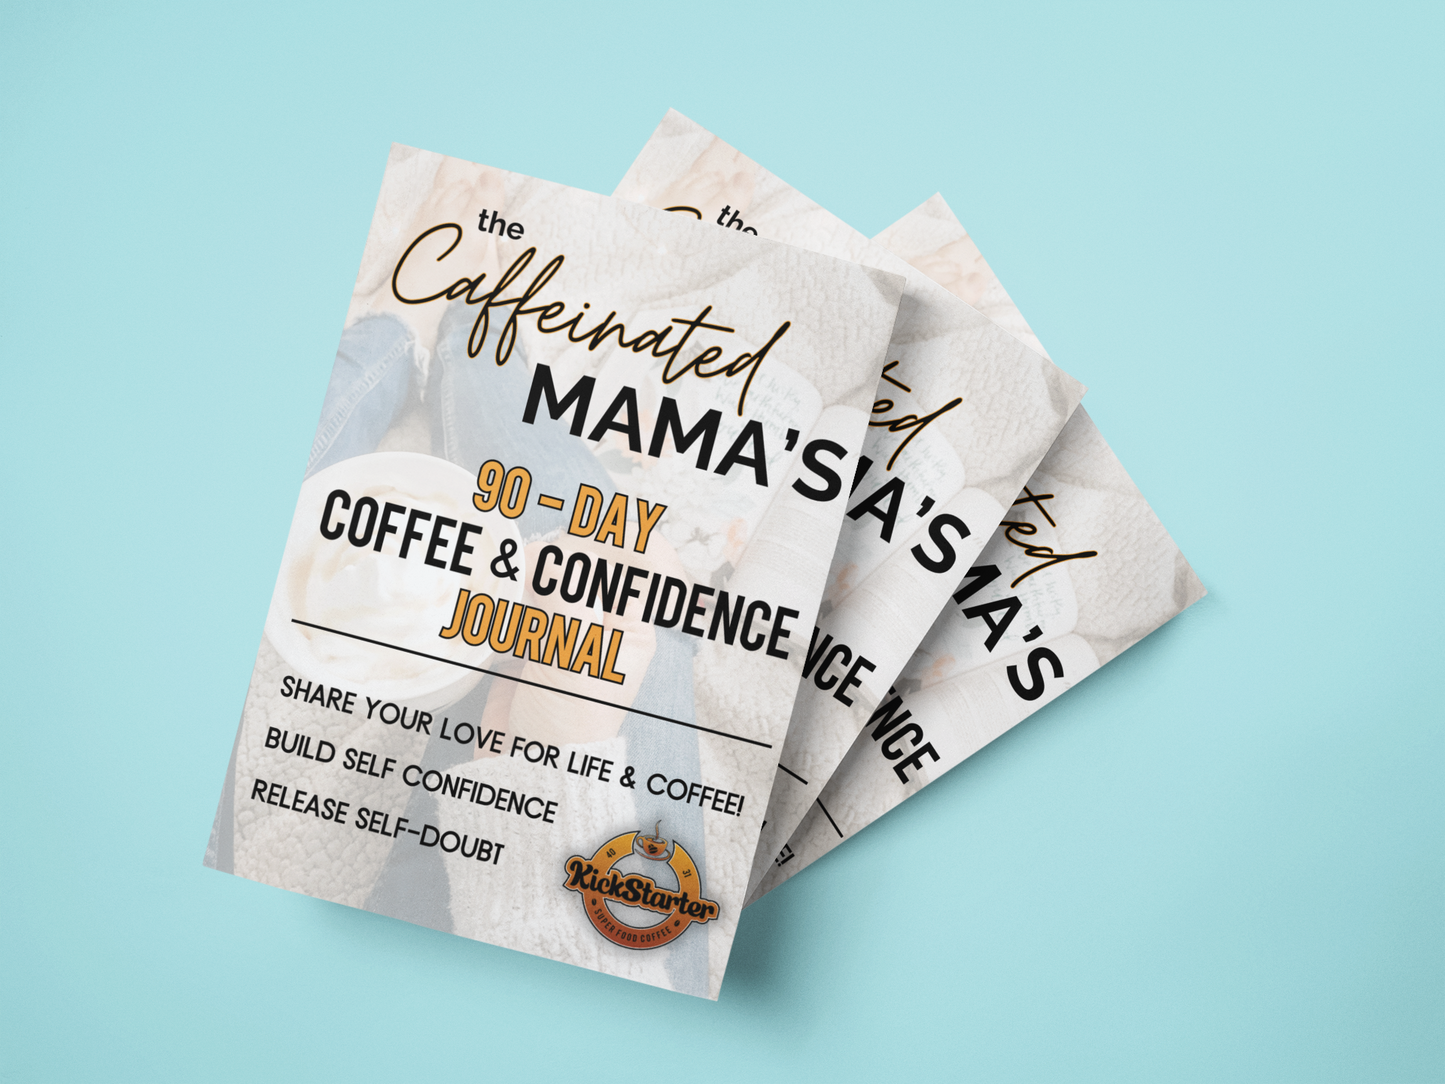 the Caffeinated Mama's 90-Day Coffee & Confidence Journal